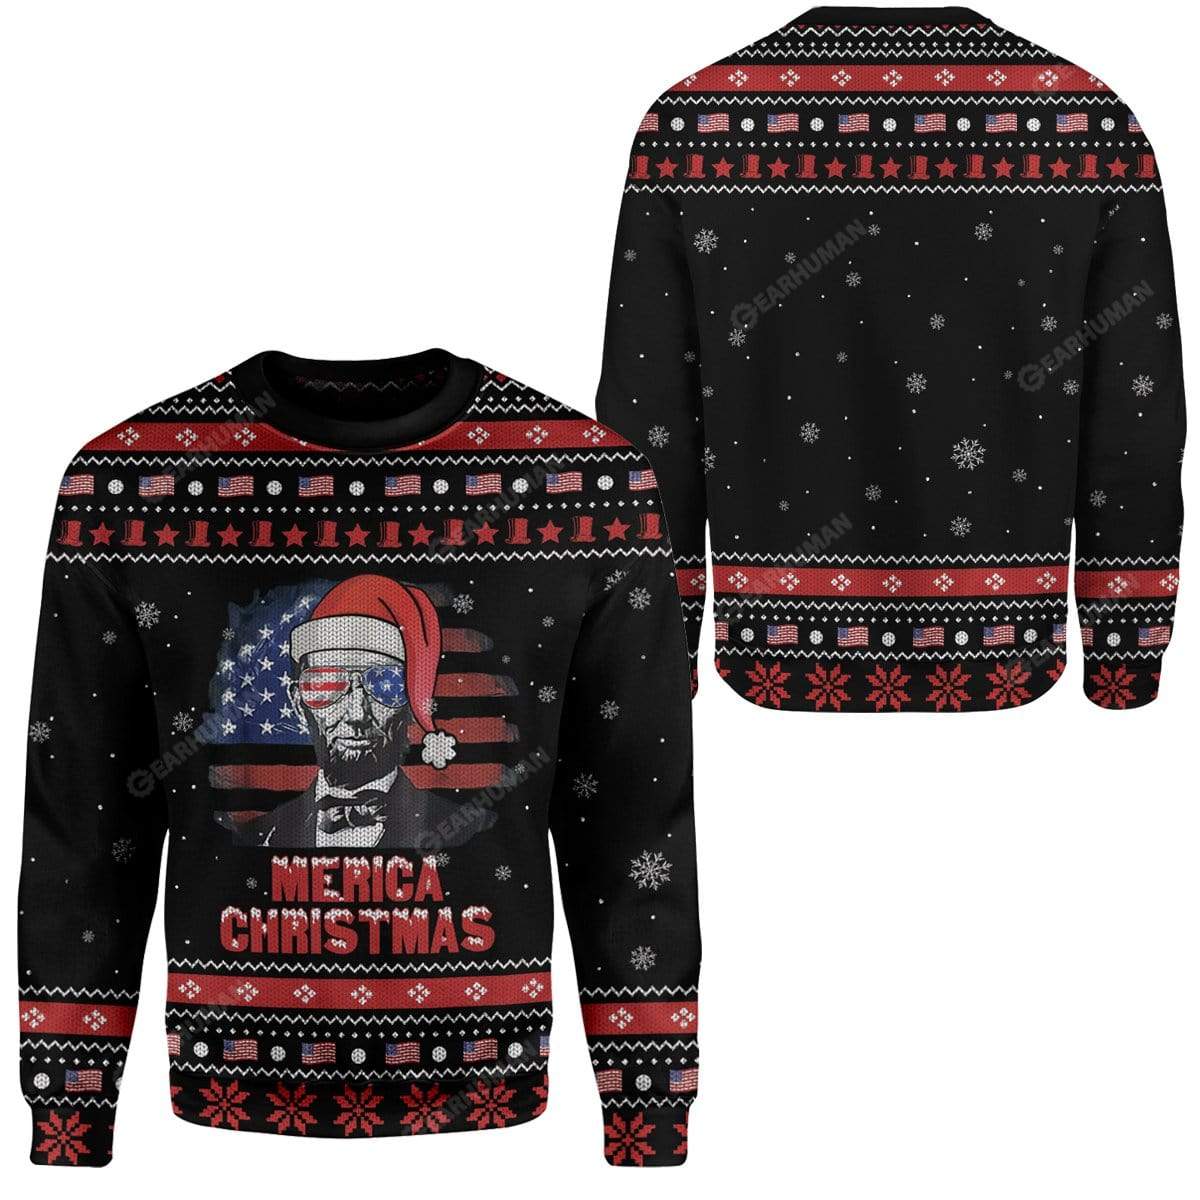 Ugly Abraham Lincoln Custom Sweater Apparel HD-DT14111905 Ugly Christmas Sweater 